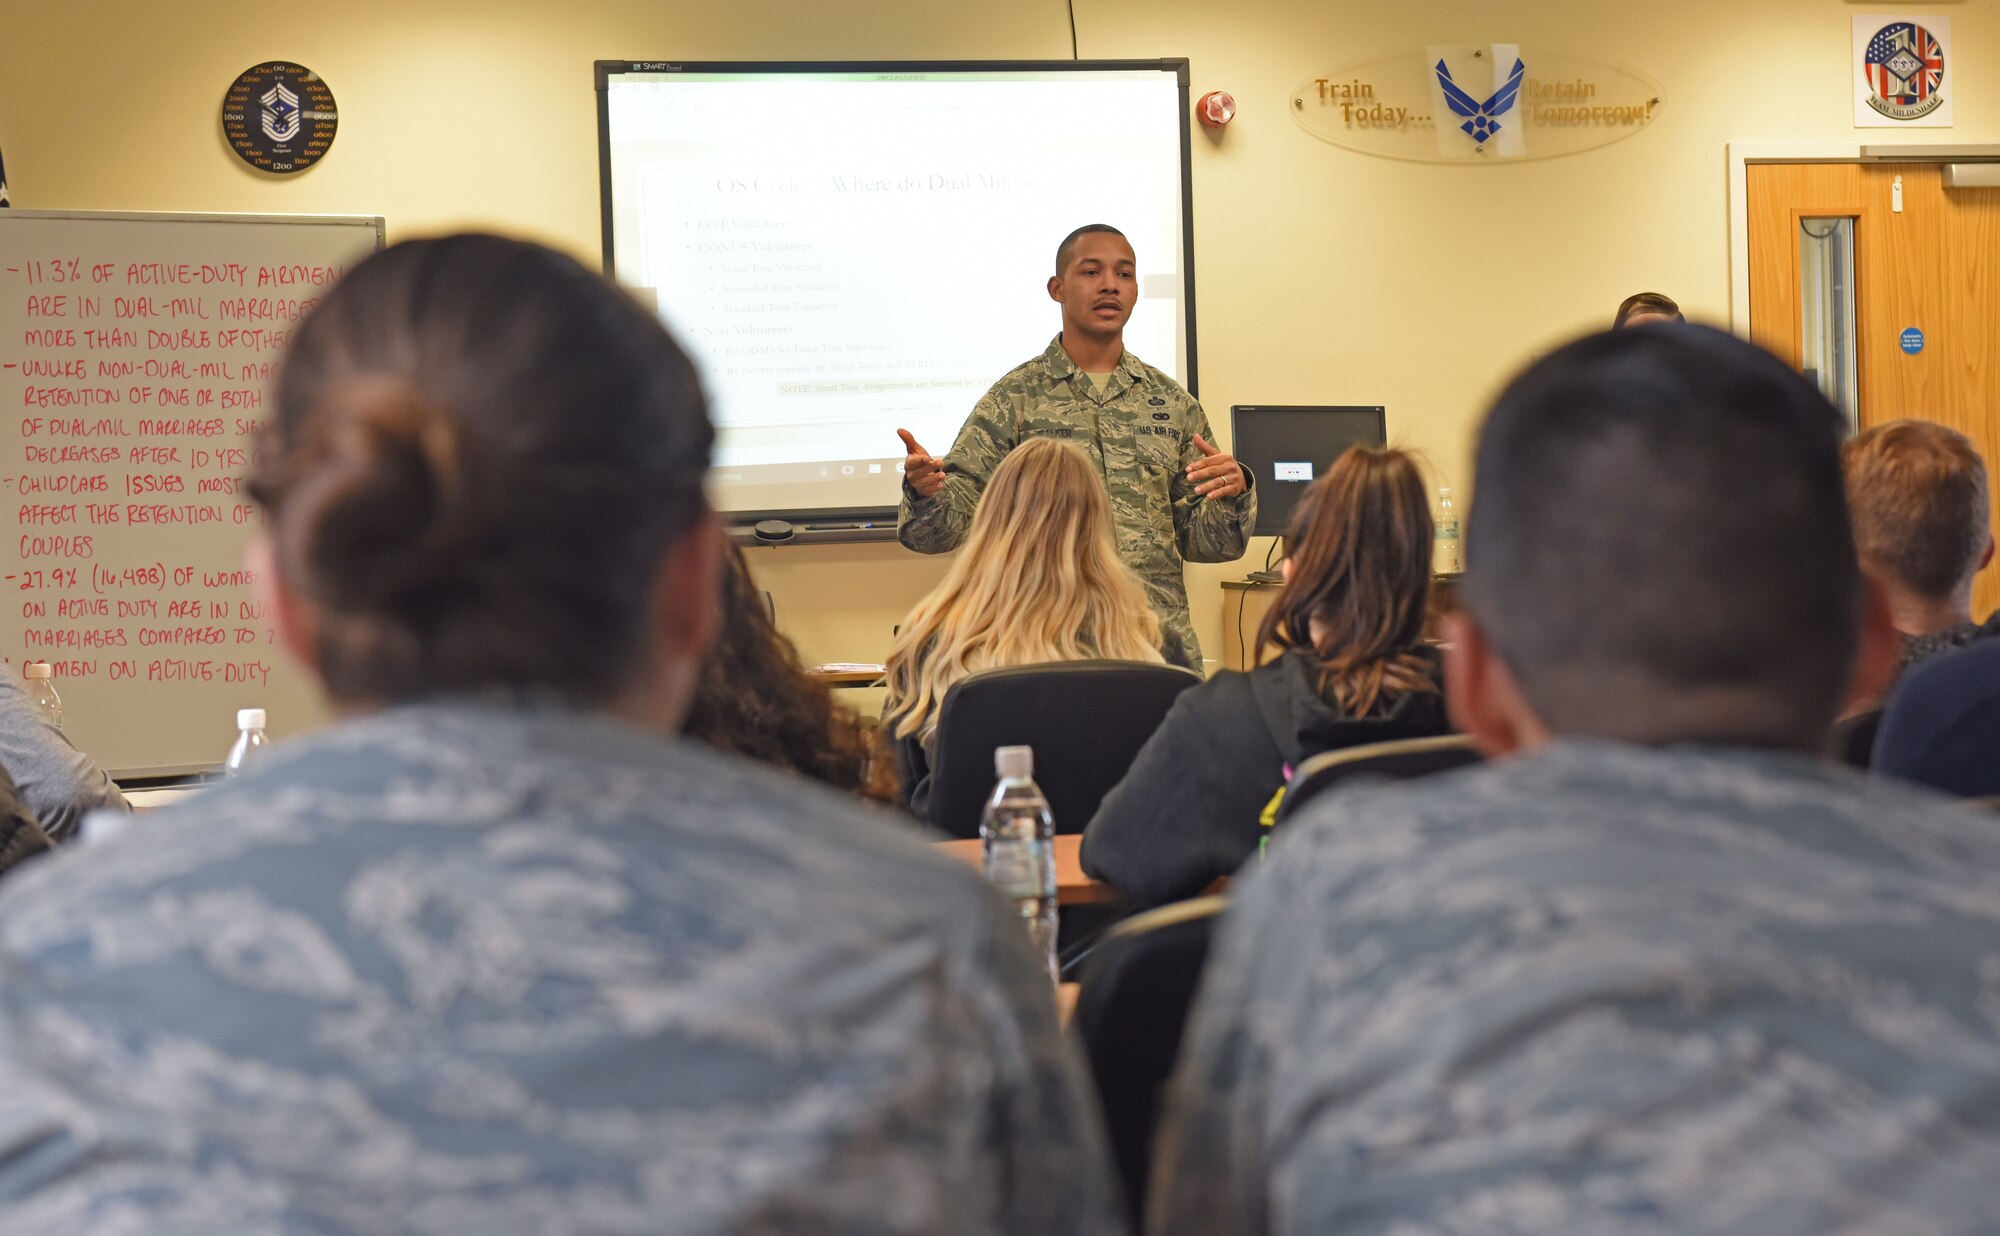 U.S. Air Force Master Sgt. Abraham Walker, 100th Force Support Squadron career development section chief, gives a brief during a dual-military seminar at RAF Mildenhall, England, March 8, 2019. The seminar included lectures on dual-military assignments and “The 5 Love Languages” to help dual-military members with any issues they may encounter during their career. (U.S. Air Force photo by Senior Airman Luke Milano)